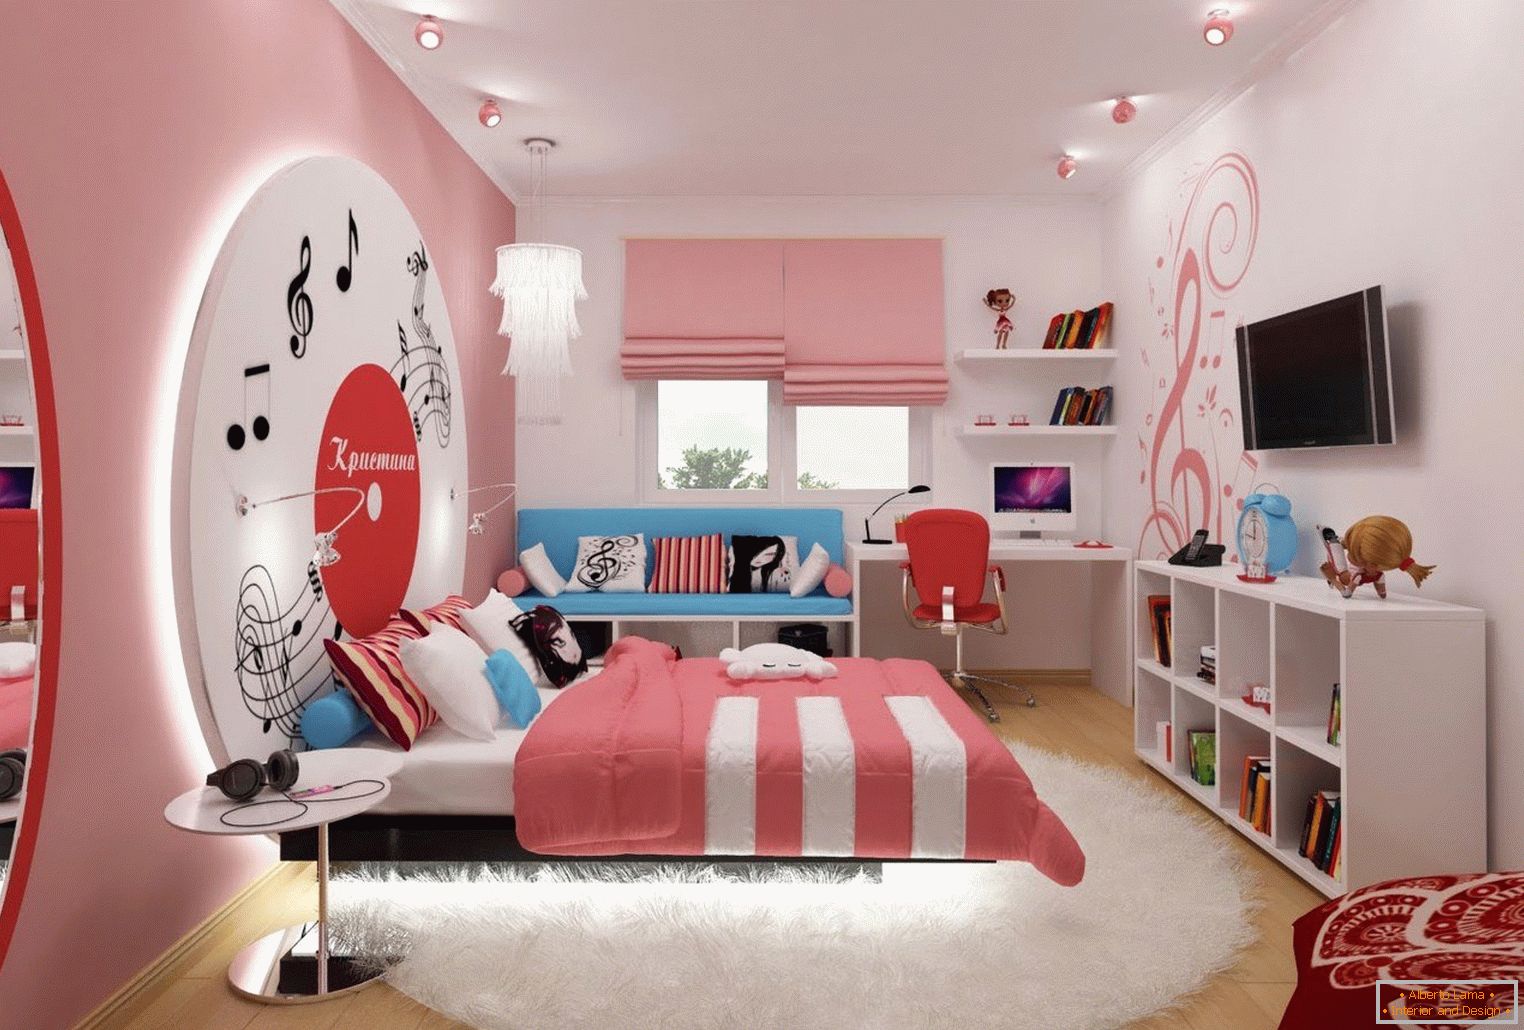 Design-project of a room for a teenager